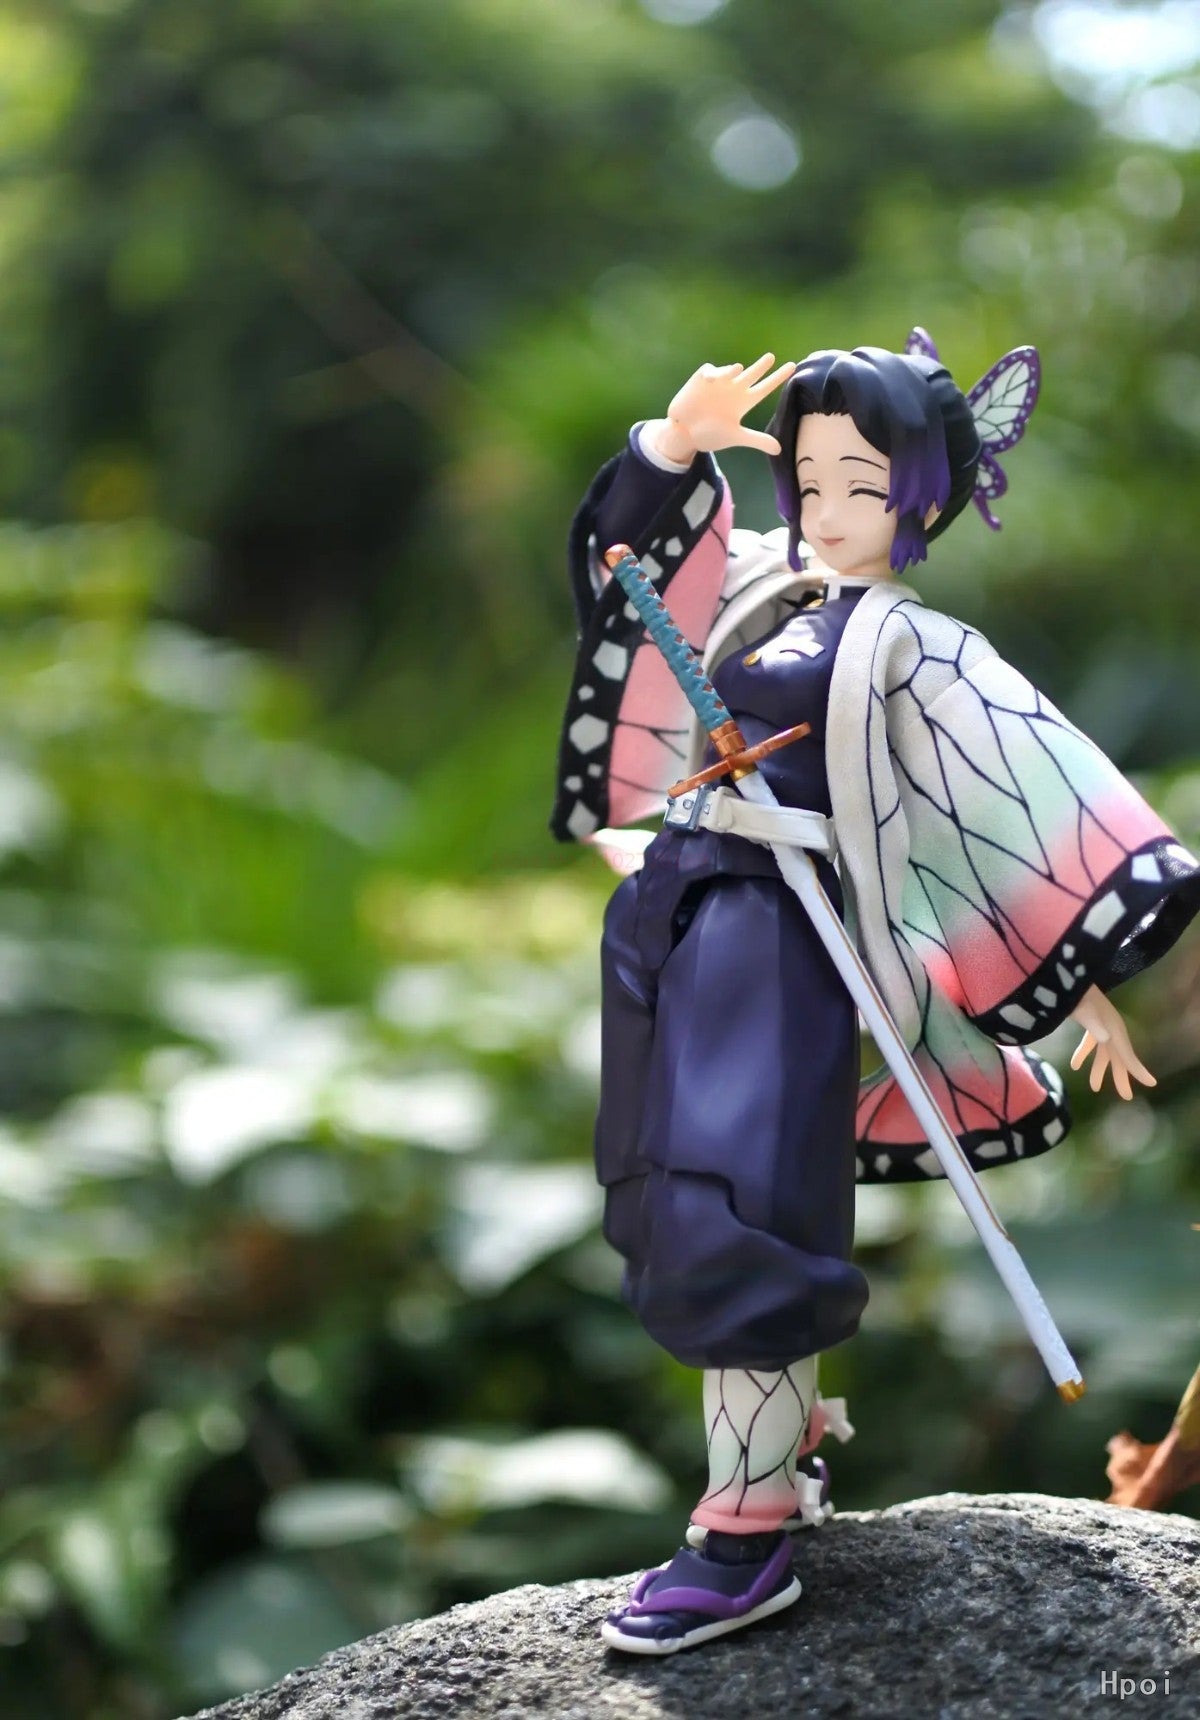 Behold Shinobu model, captured in her signature butterfly-accented Corps uniform. If you are looking for more Demon Slayer Merch, We have it all! | Check out all our Anime Merch now!